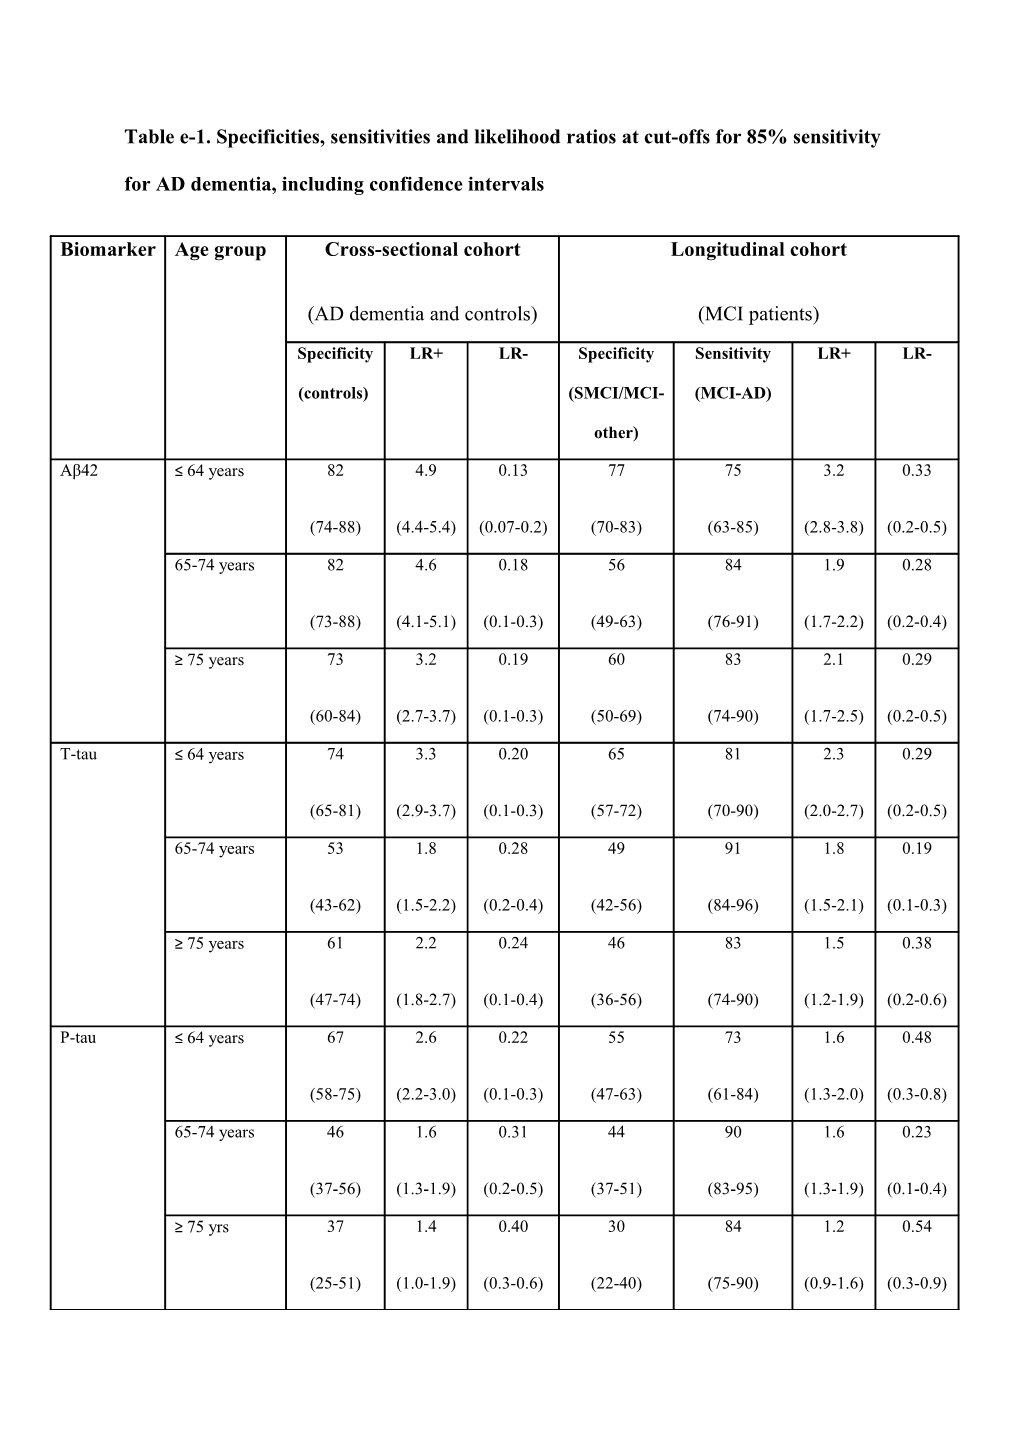 Table E-1. Specificities, Sensitivities and Likelihood Ratios at Cut-Offs for 85% Sensitivity